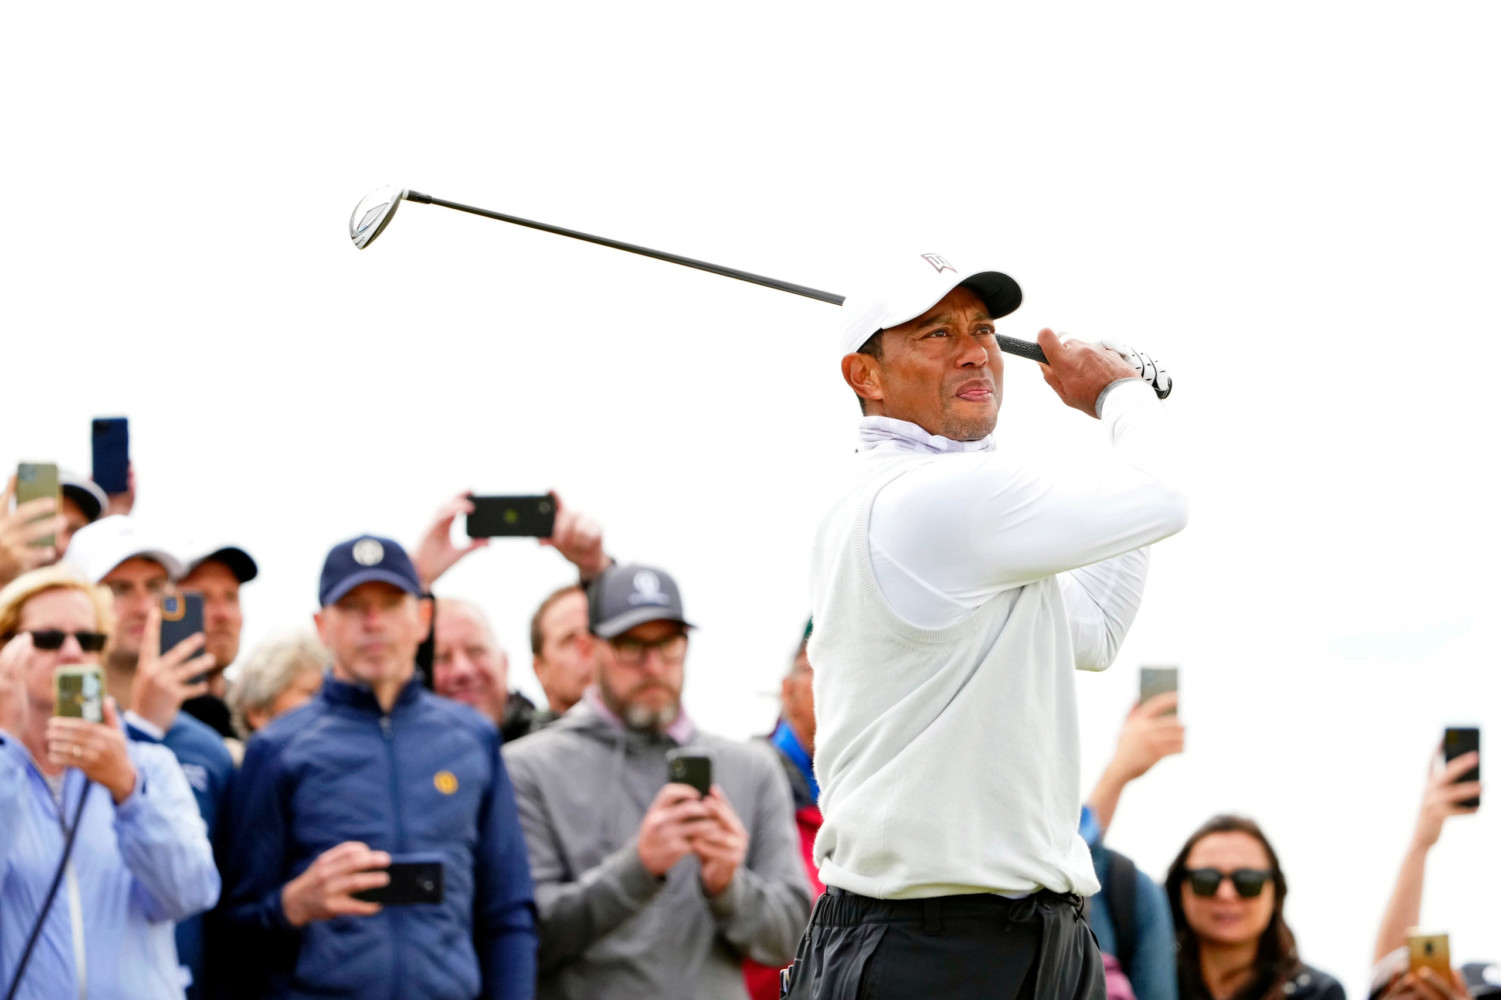 Tiger-woods-swings-club-in-front-of-fans